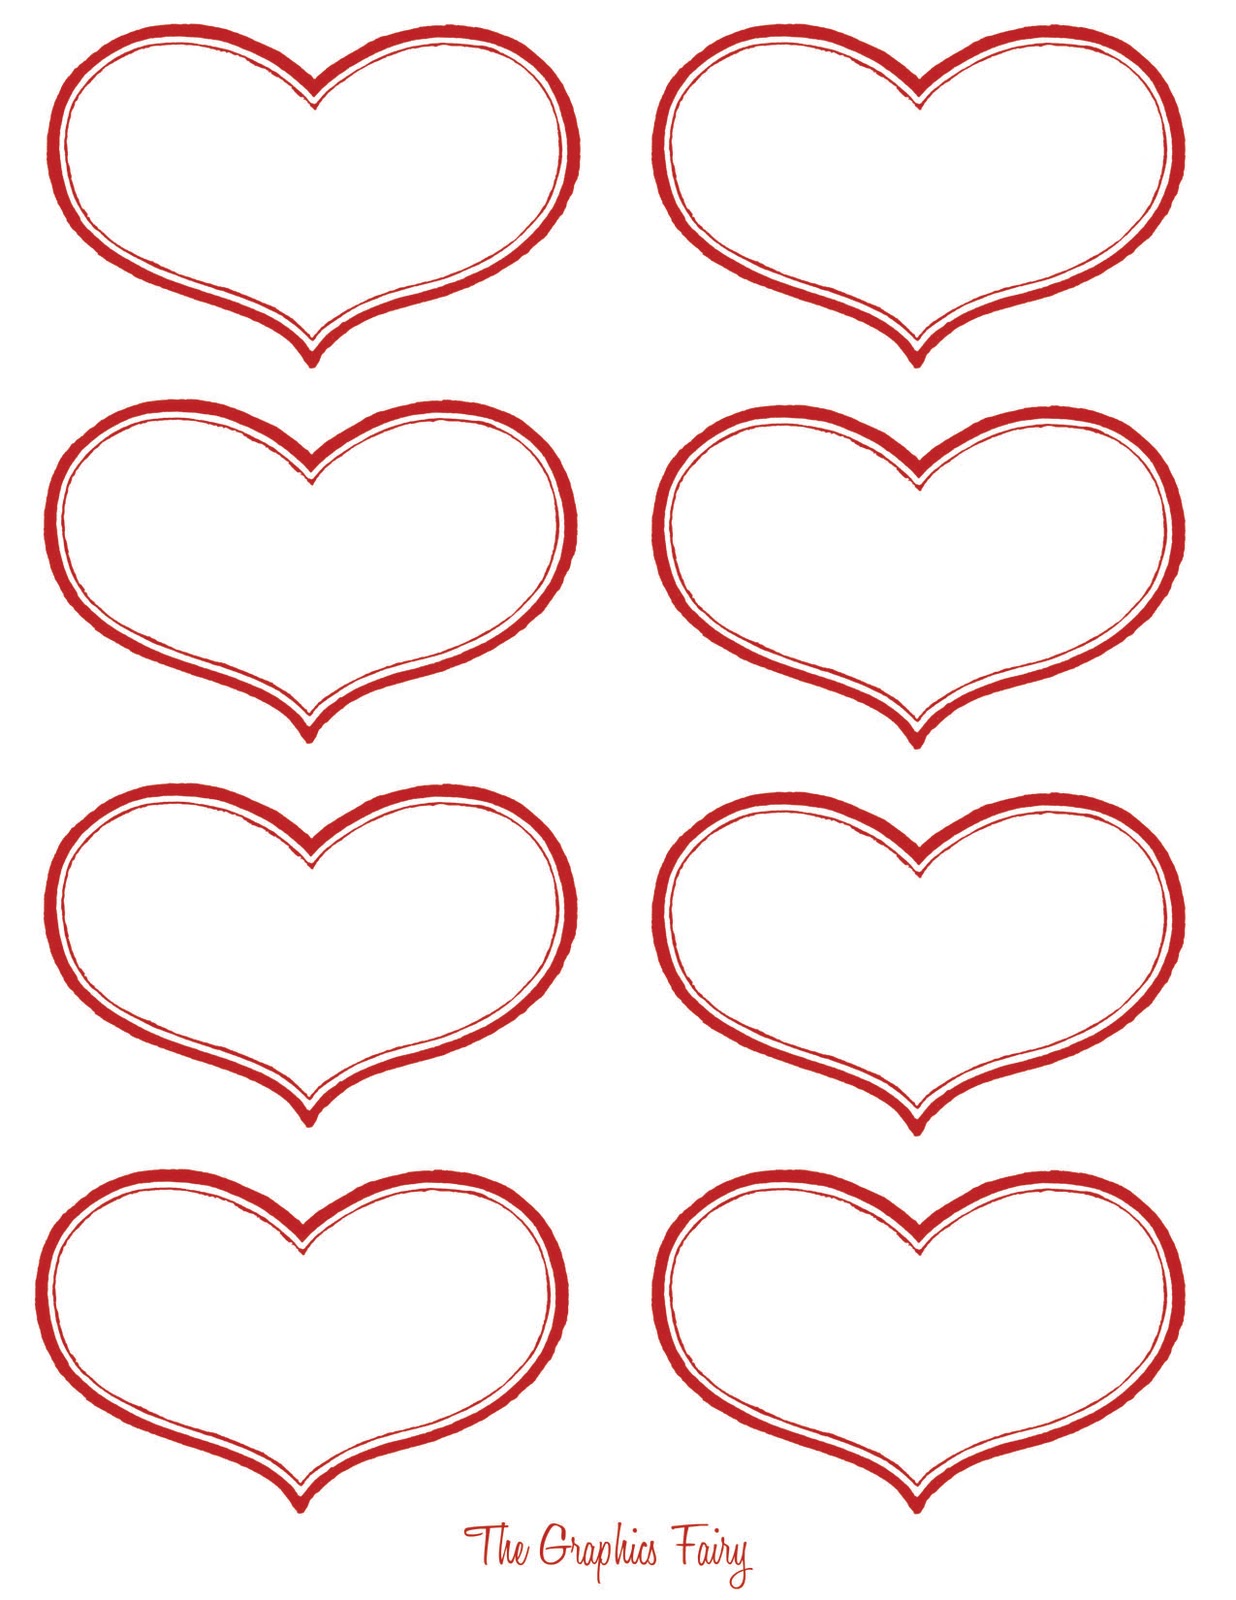 Free Shipping Label Template Cute Mailing Labels Valentines